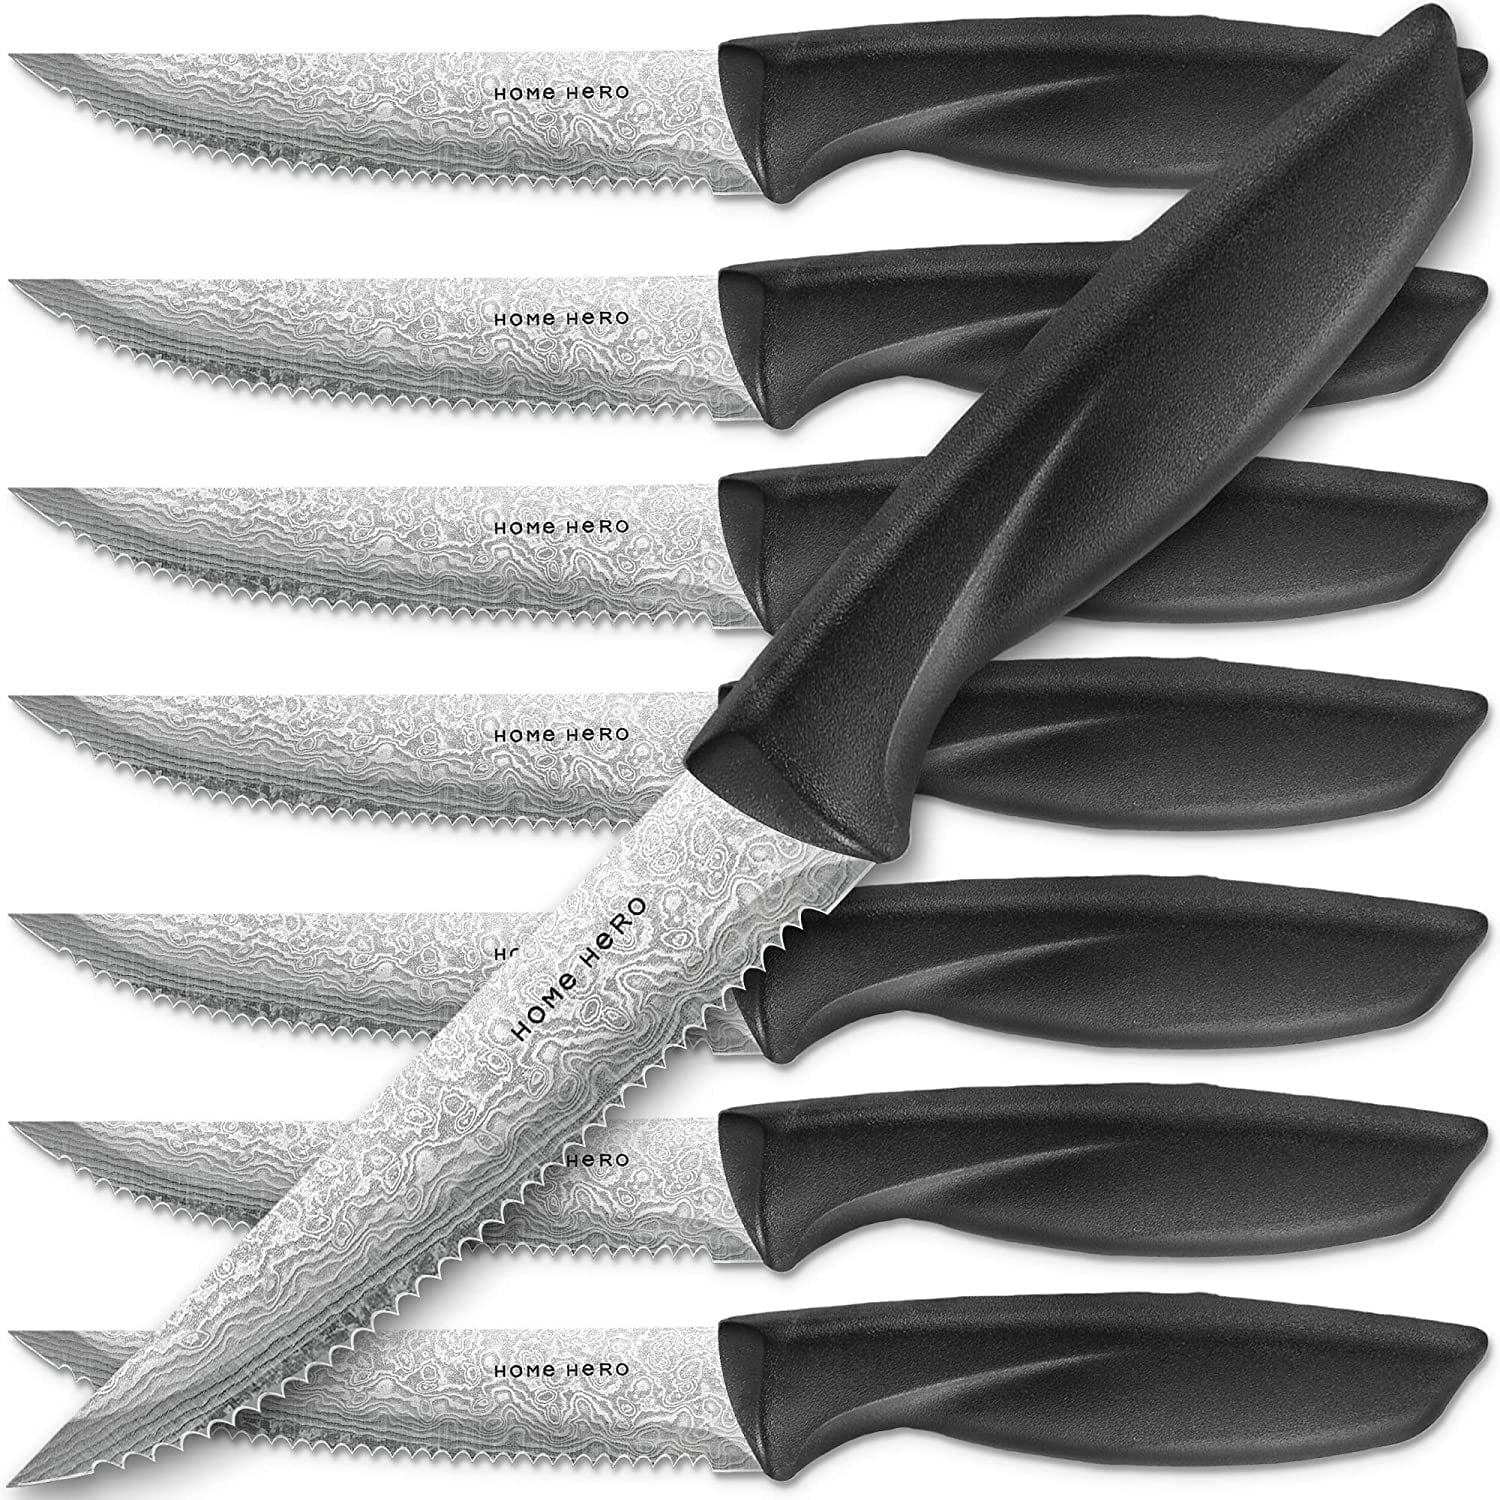 ETITATO Knife Sharpeners Chef Knife, Kitchen Kit 8 Inches Non-Stick  Stainless Steel Ultra Sharp Kitchen Knives for Home Kitchen， Professional  5-in-1